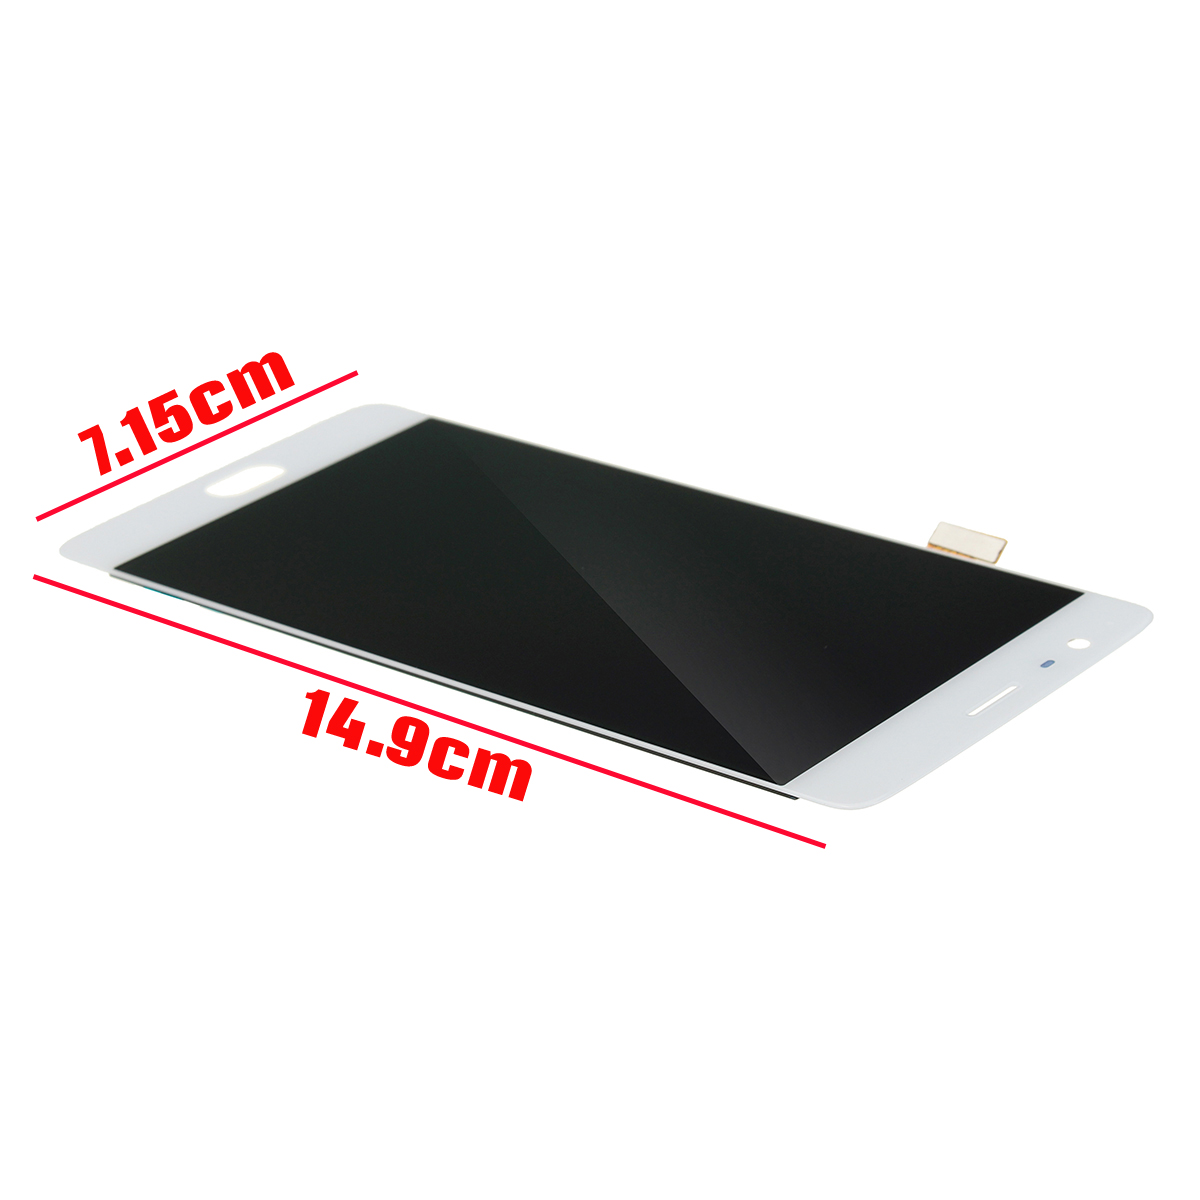 OLED-White-LCD-DisplayTouch-Phone-Screen-Digitizer-Replacement-For-OnePlus-3-3T-A3000-A3003-1238558